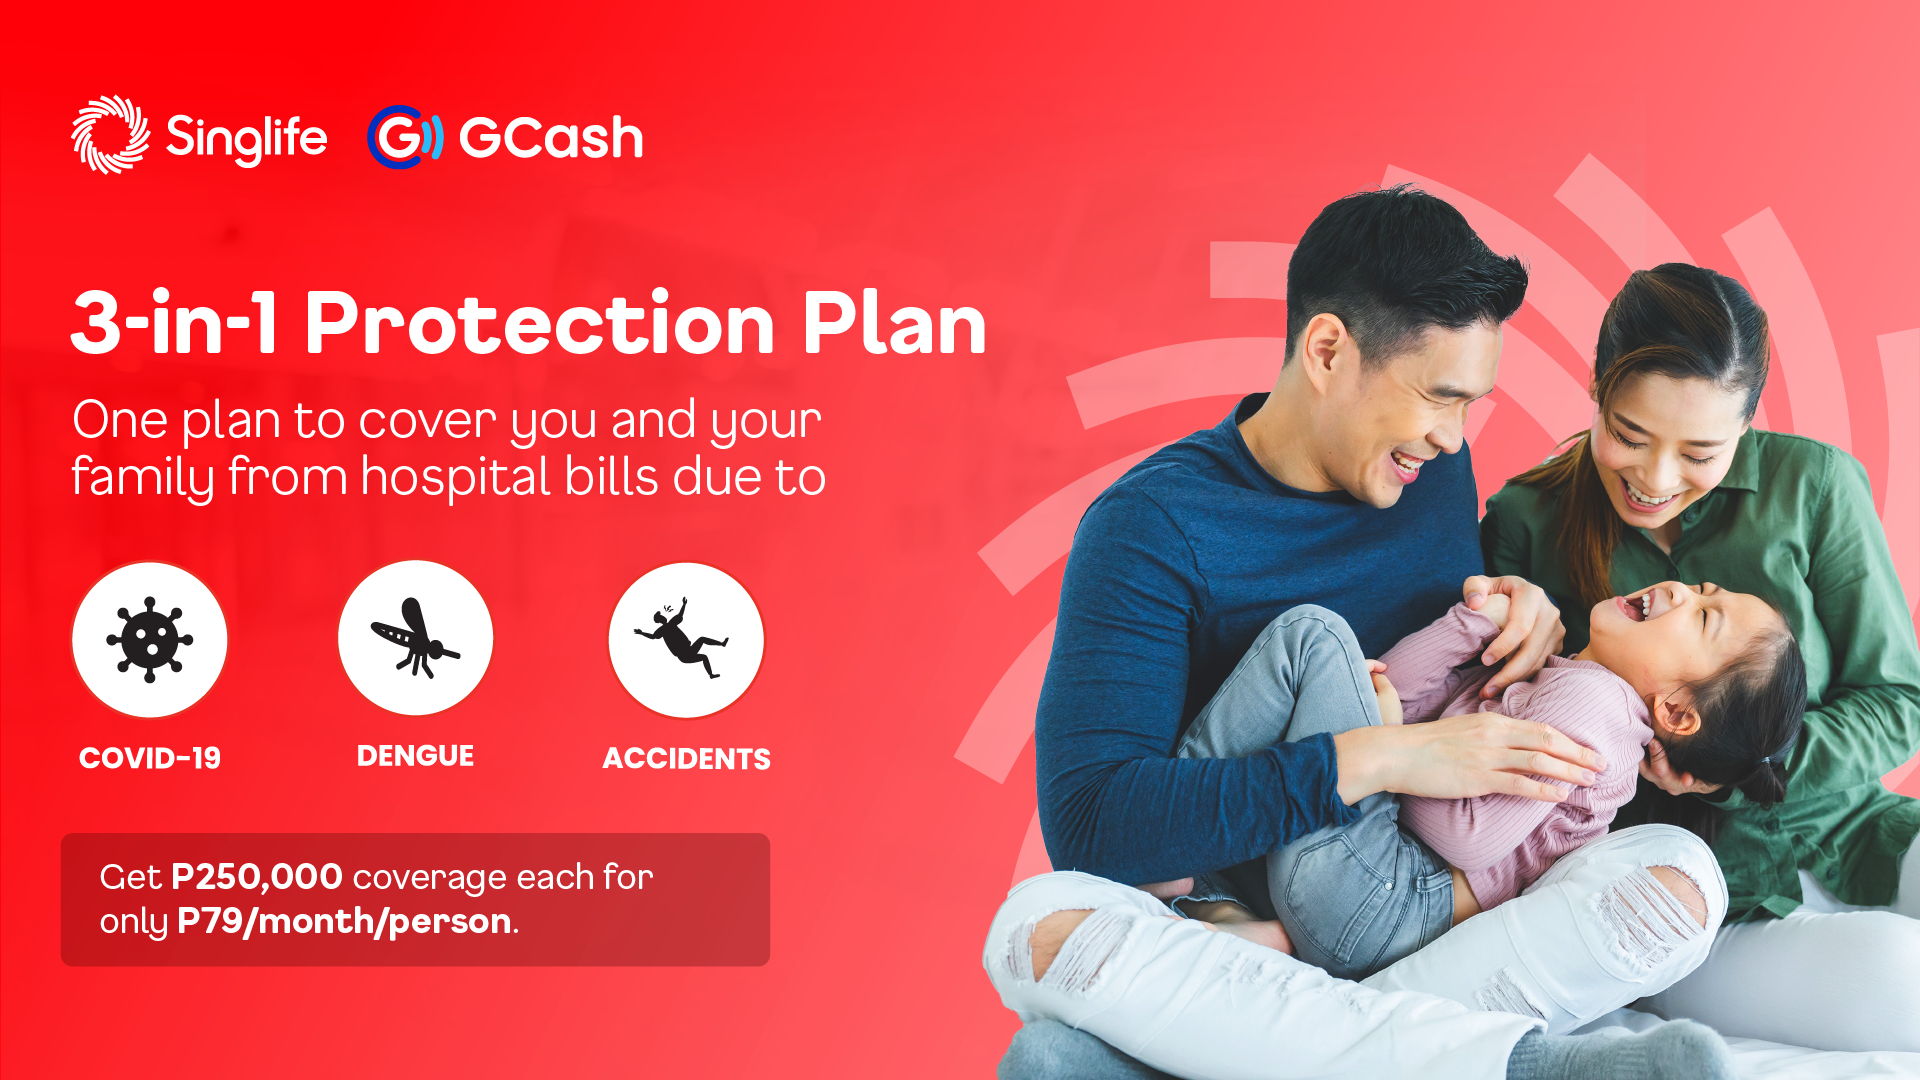 Want 3-in-1 protection plan for you and your family? Choose Singlife's newest insurance